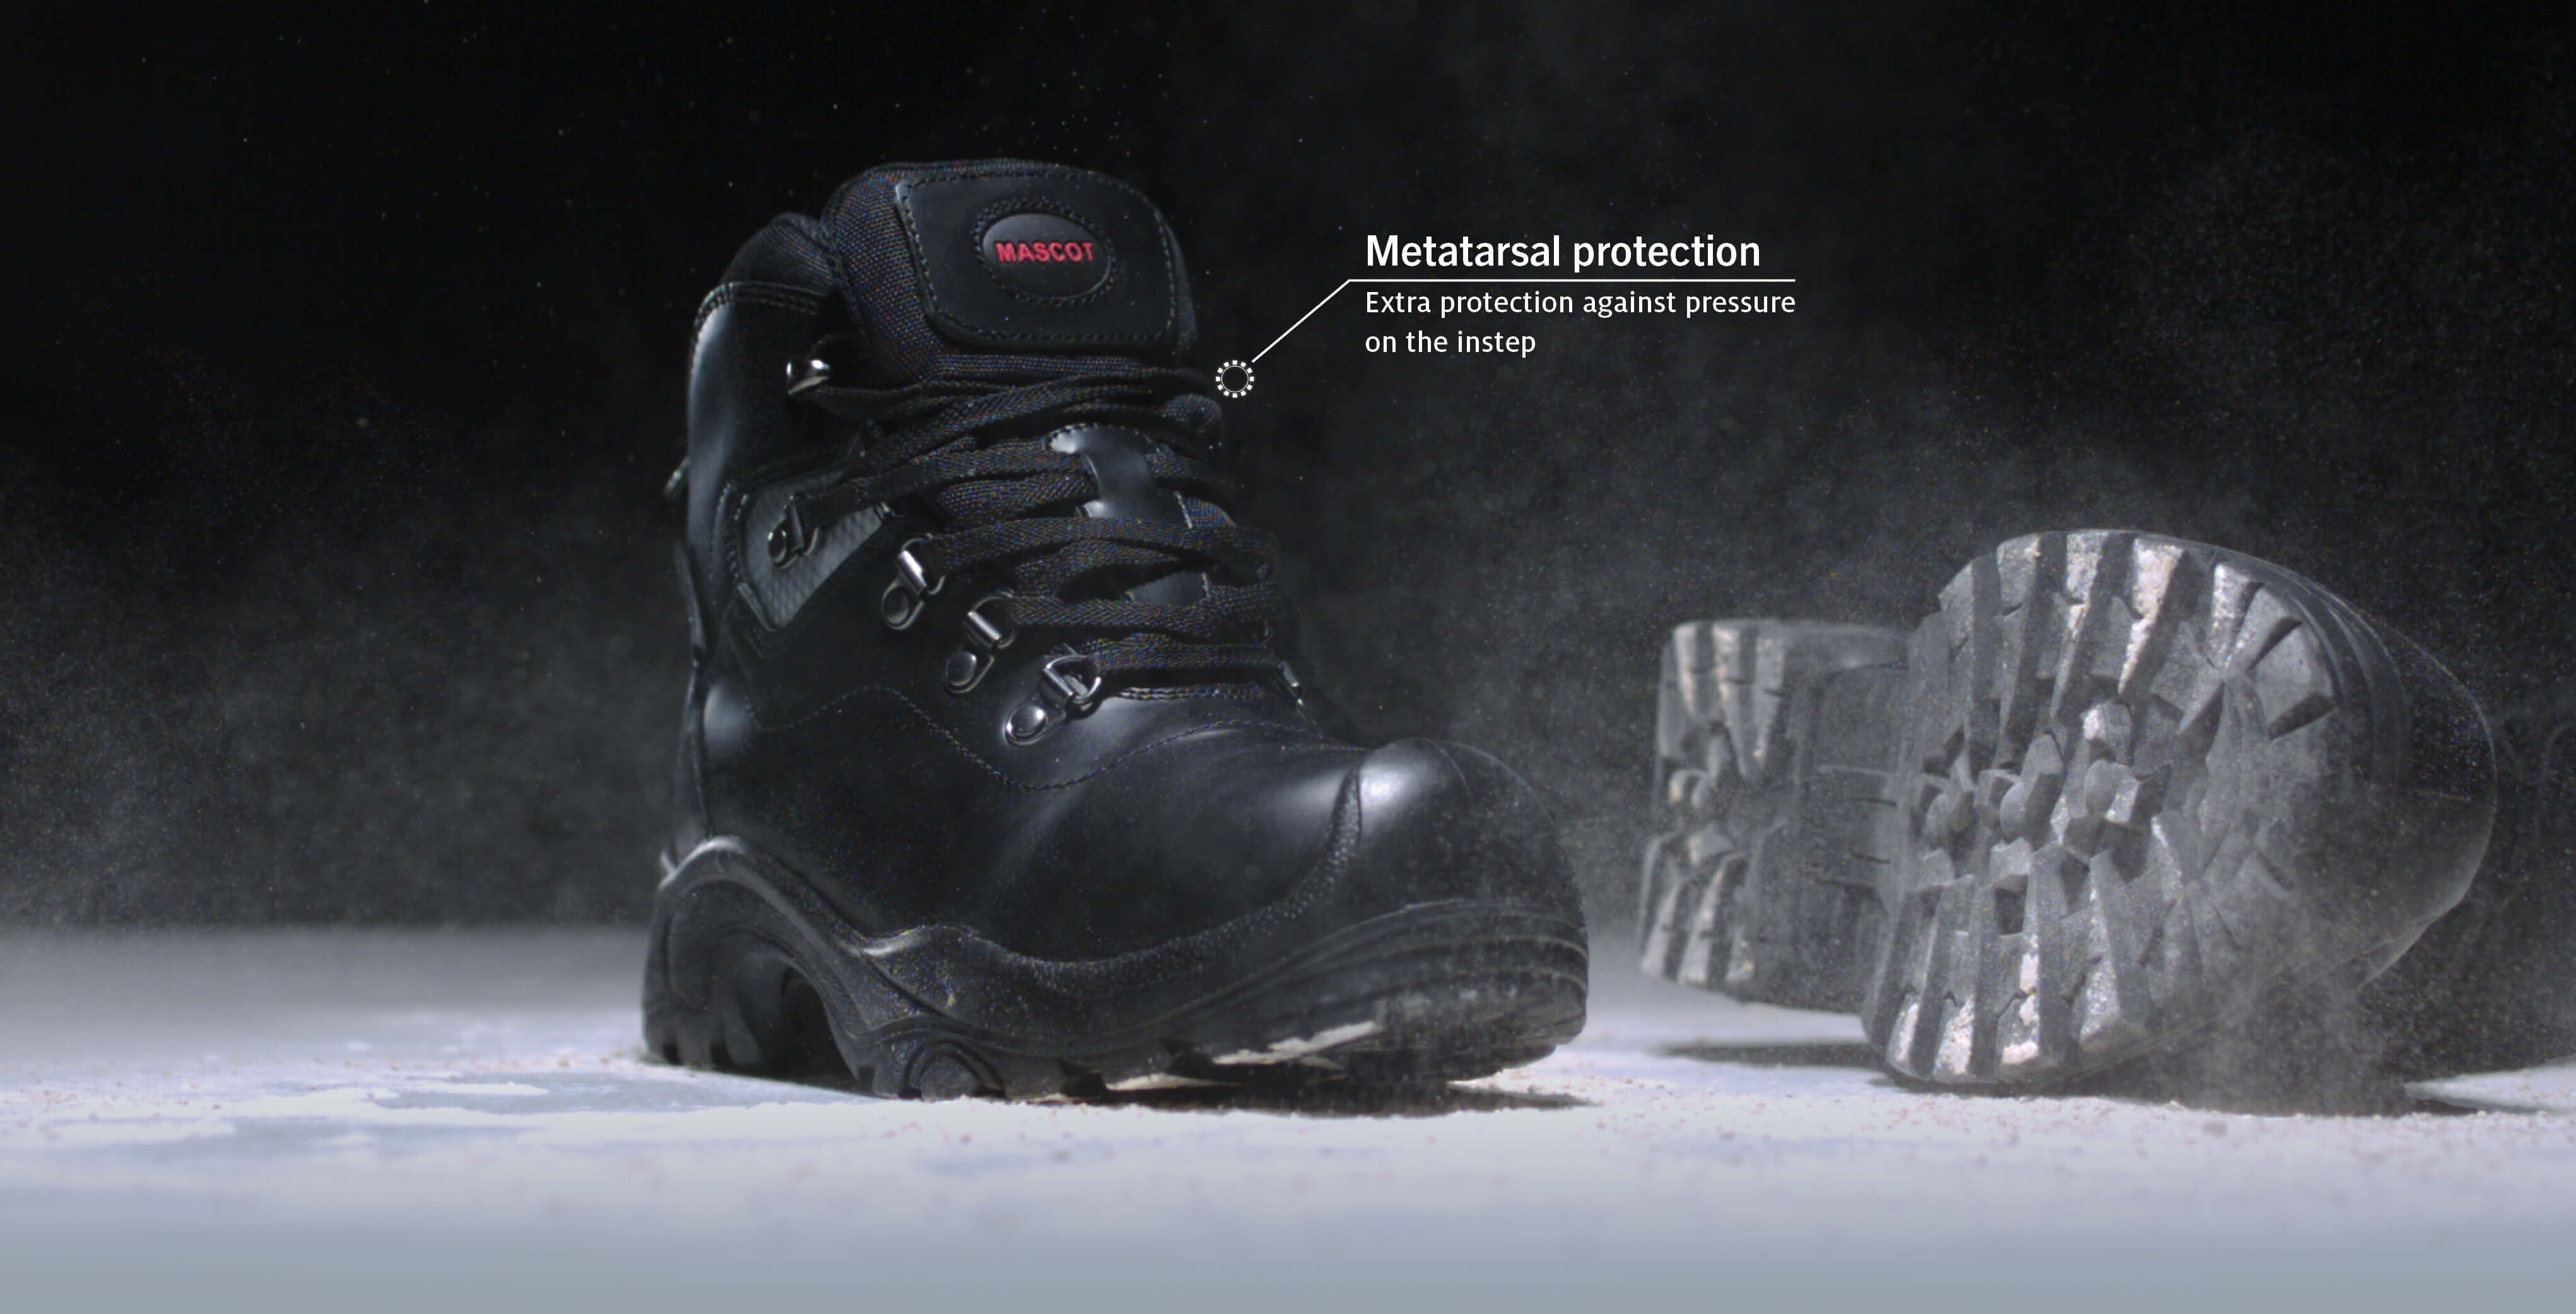 MASCOT® FOOTWEAR INDUSTRY – high durability and sturdiness&nbsp;Metatarsal protection. Upper with extra protection against pressure on the in-step - minimising the risk of impact and breaks.&nbsp;Safety Boot